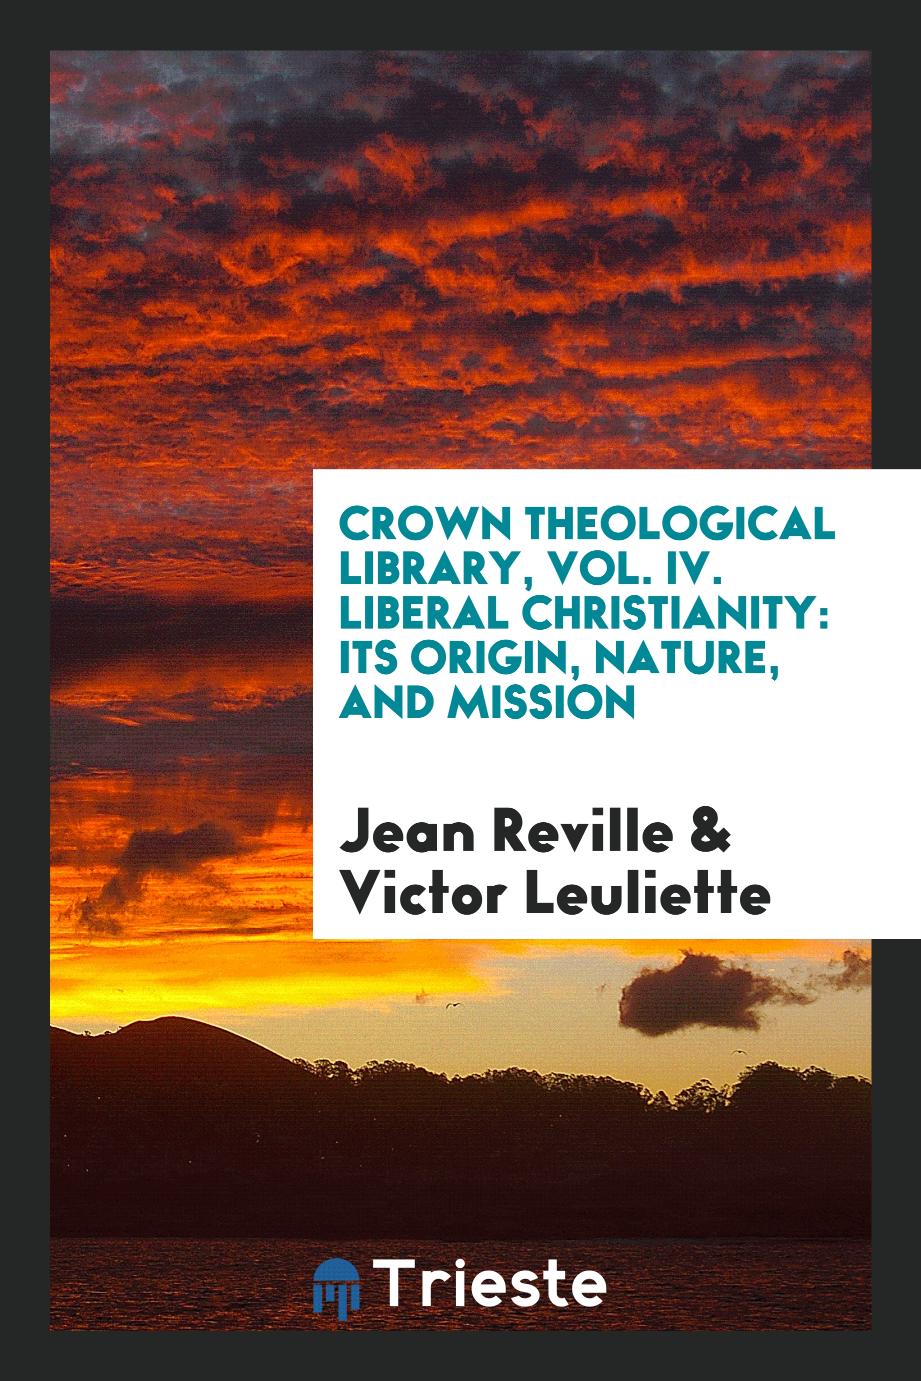 Crown Theological Library, Vol. IV. Liberal Christianity: Its Origin, Nature, and Mission